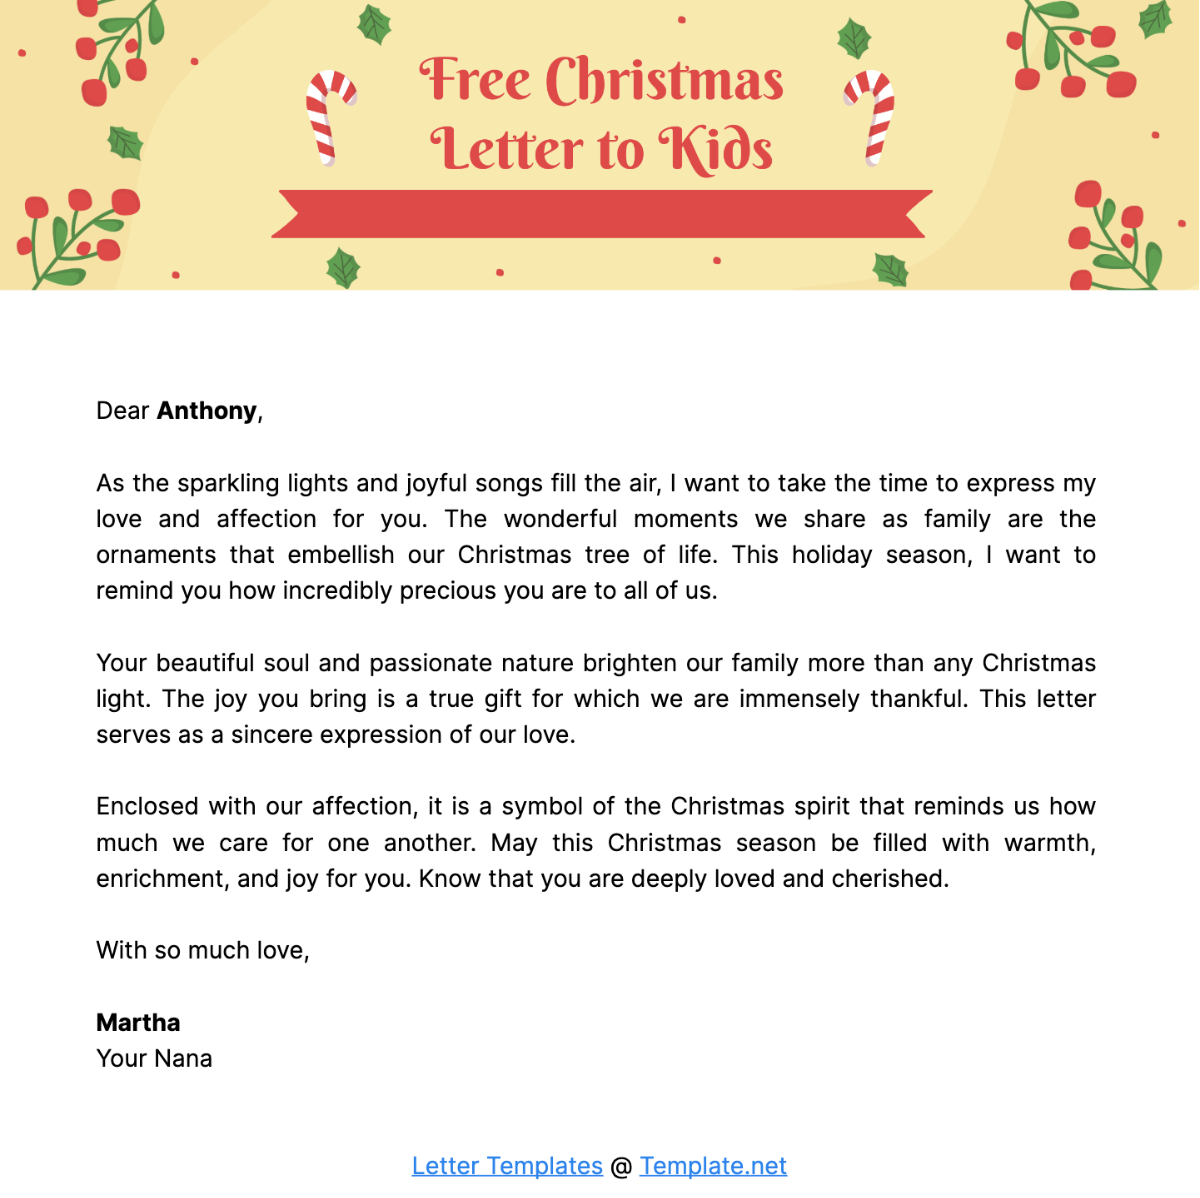 Christmas Letter to Kids Template